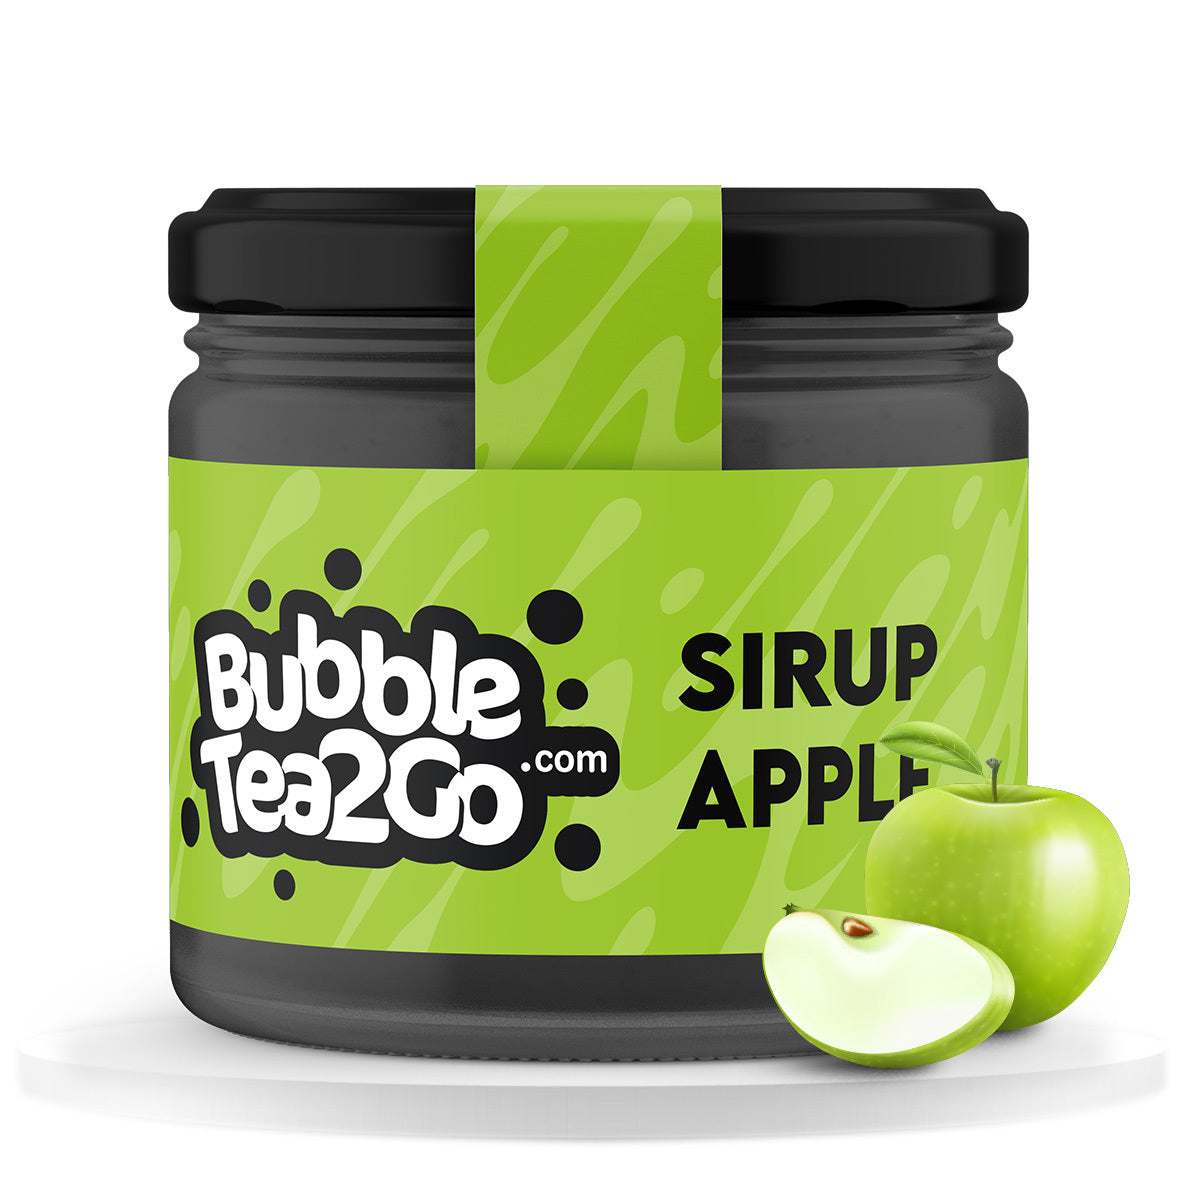 Sirop - Apple 2 portions (50g)